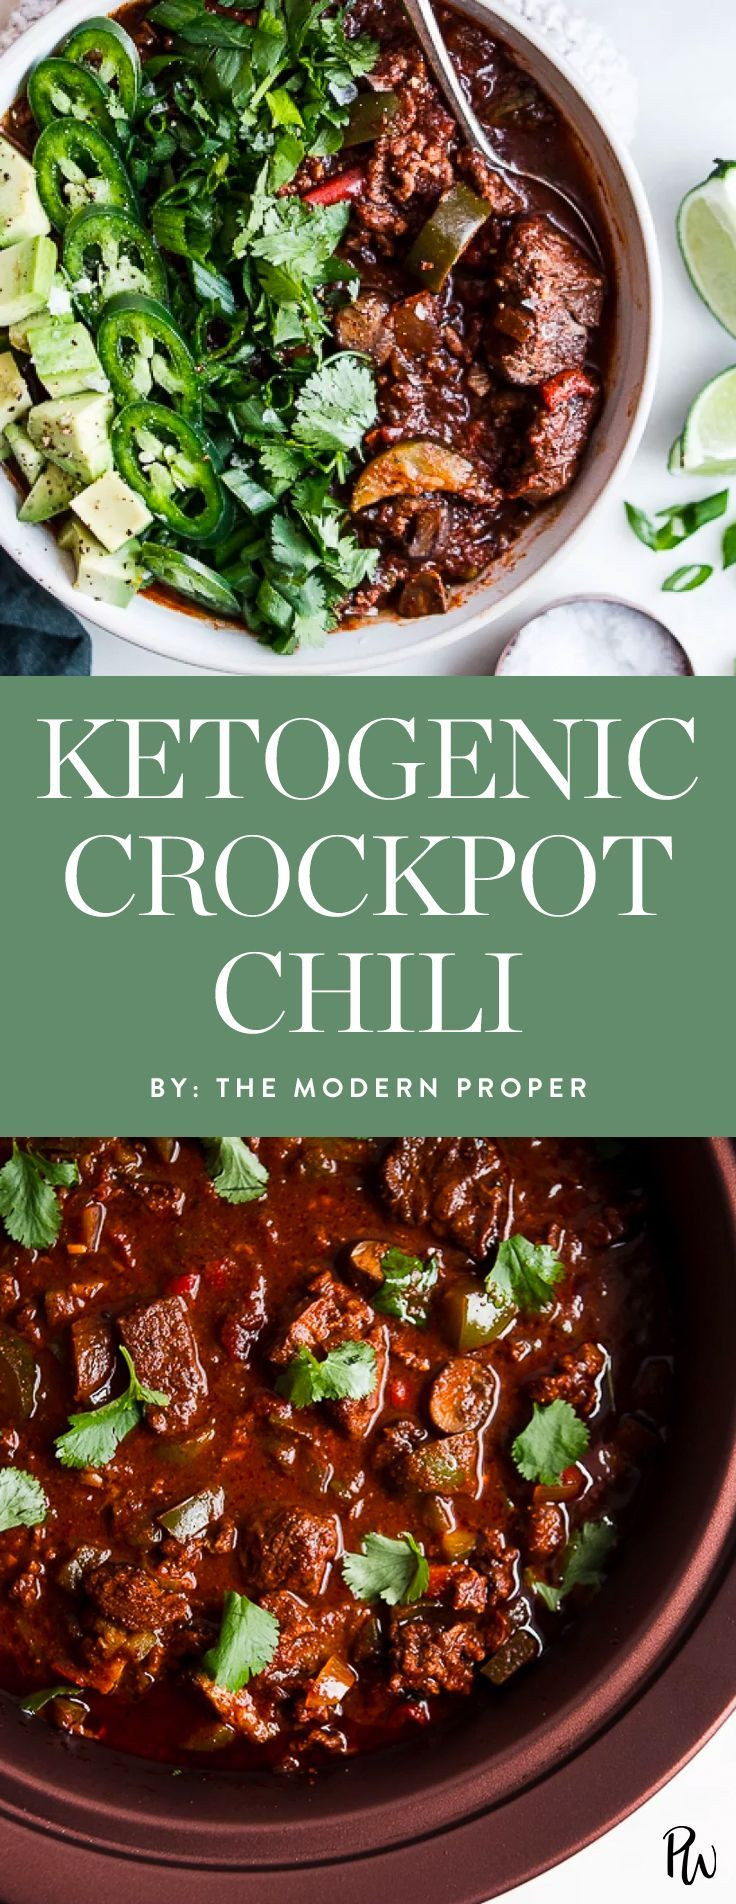 Healthy Keto Crockpot Recipes
 The 25 Best Keto Slow Cooker Recipes of All Time